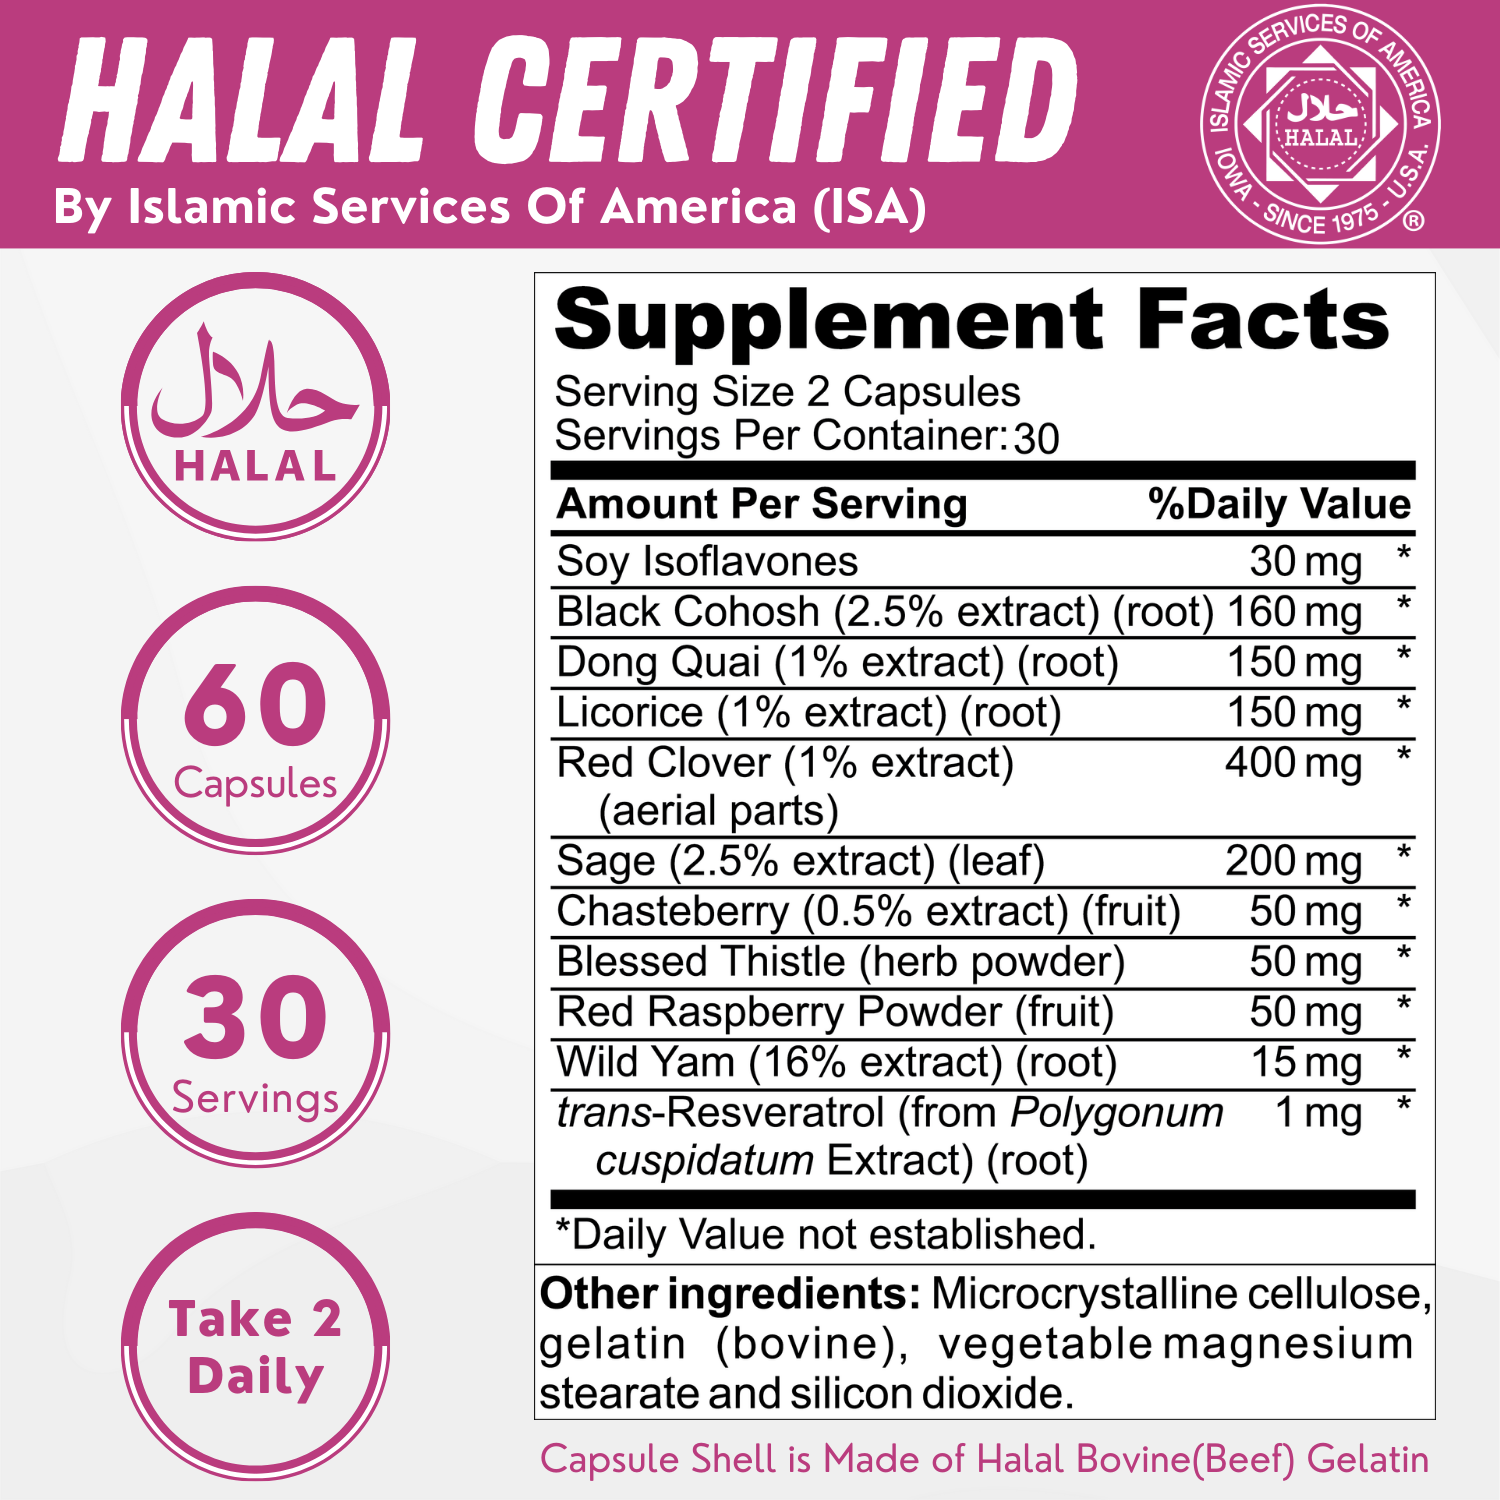 Pack Of 3 - Halal Women Support Capsules